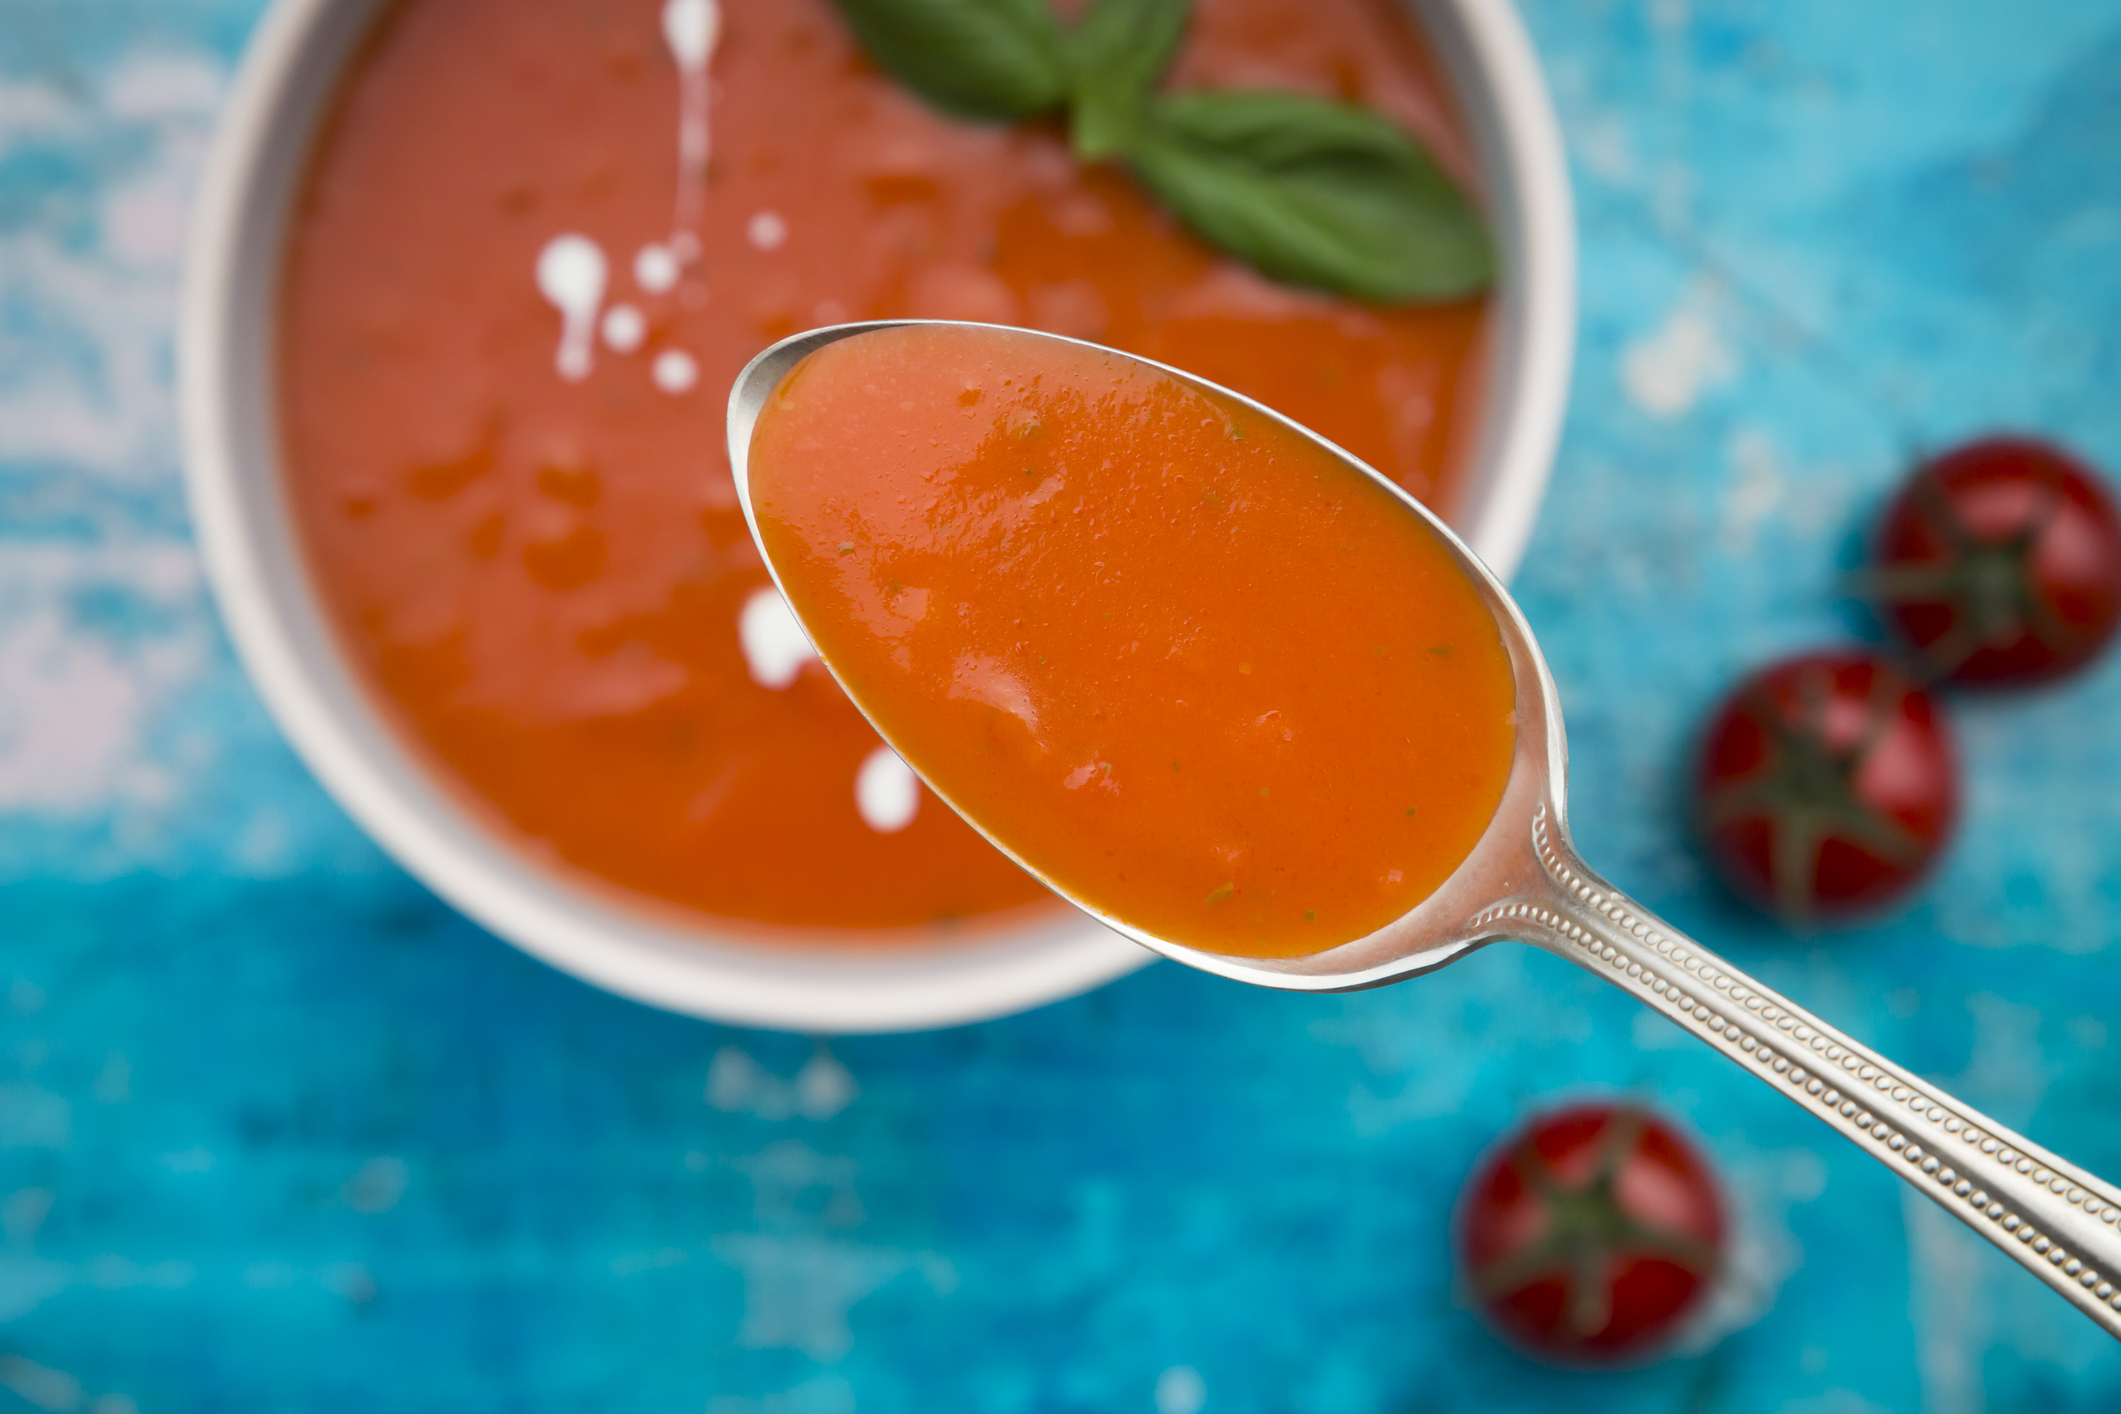 A spoonful of tomato soup above a bowl, with basil leaves and tomatoes nearby